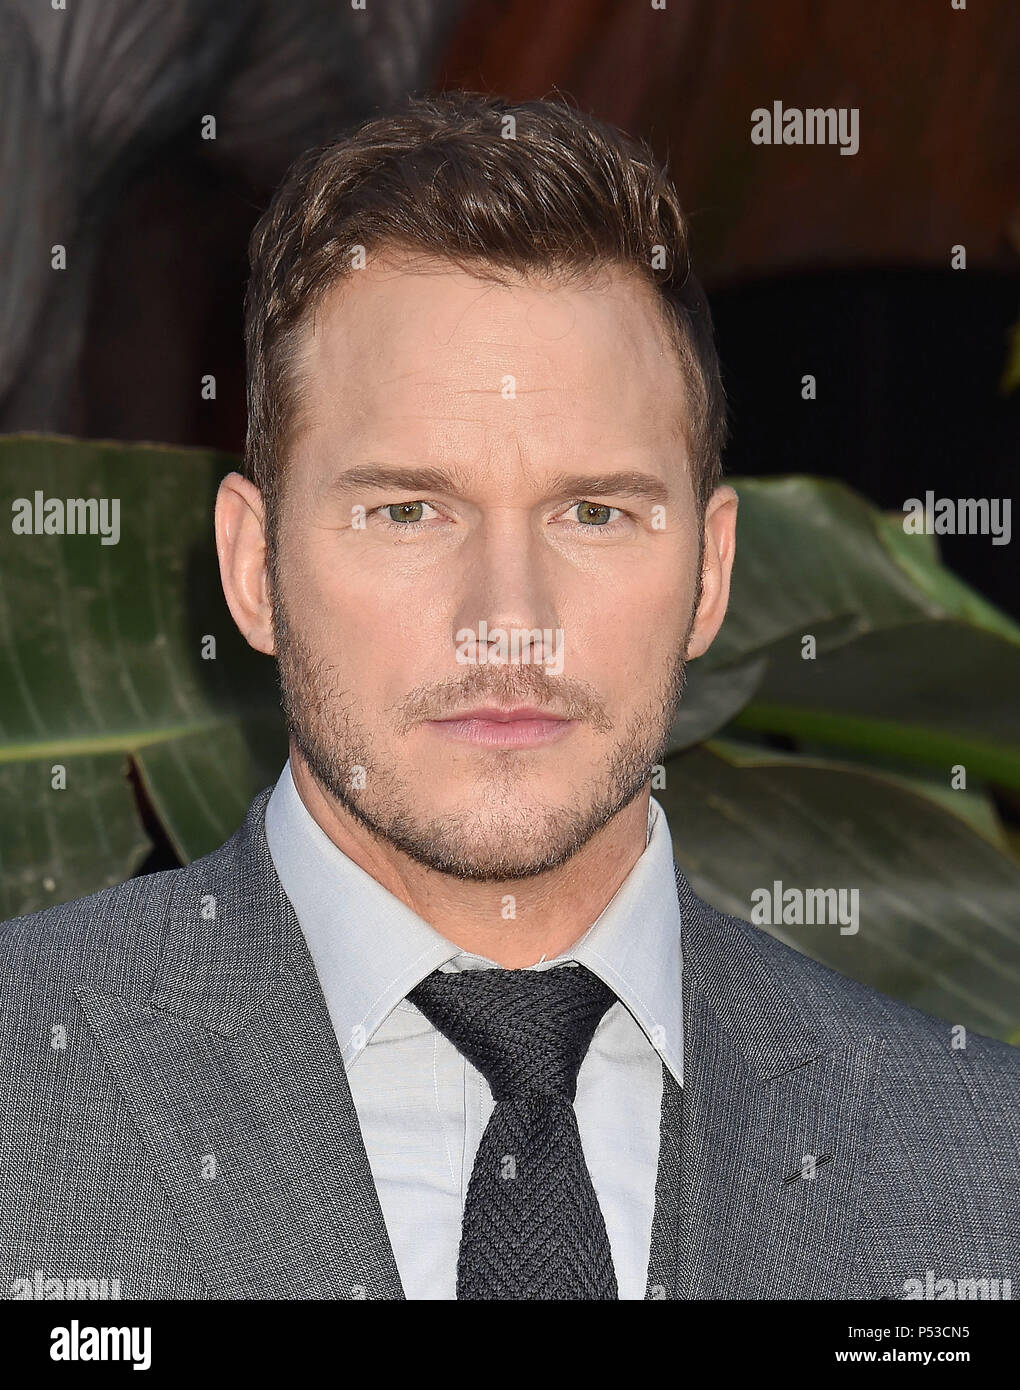 CHRIS PRATT US film actor  attends the premiere of Universal Pictures and Amblin Entertainment's 'Jurassic World: Fallen Kingdom' at Walt Disney Concert Hall on June 12, 2018 in Los Angeles, California. Photo: Jeffrey Mayer Stock Photo